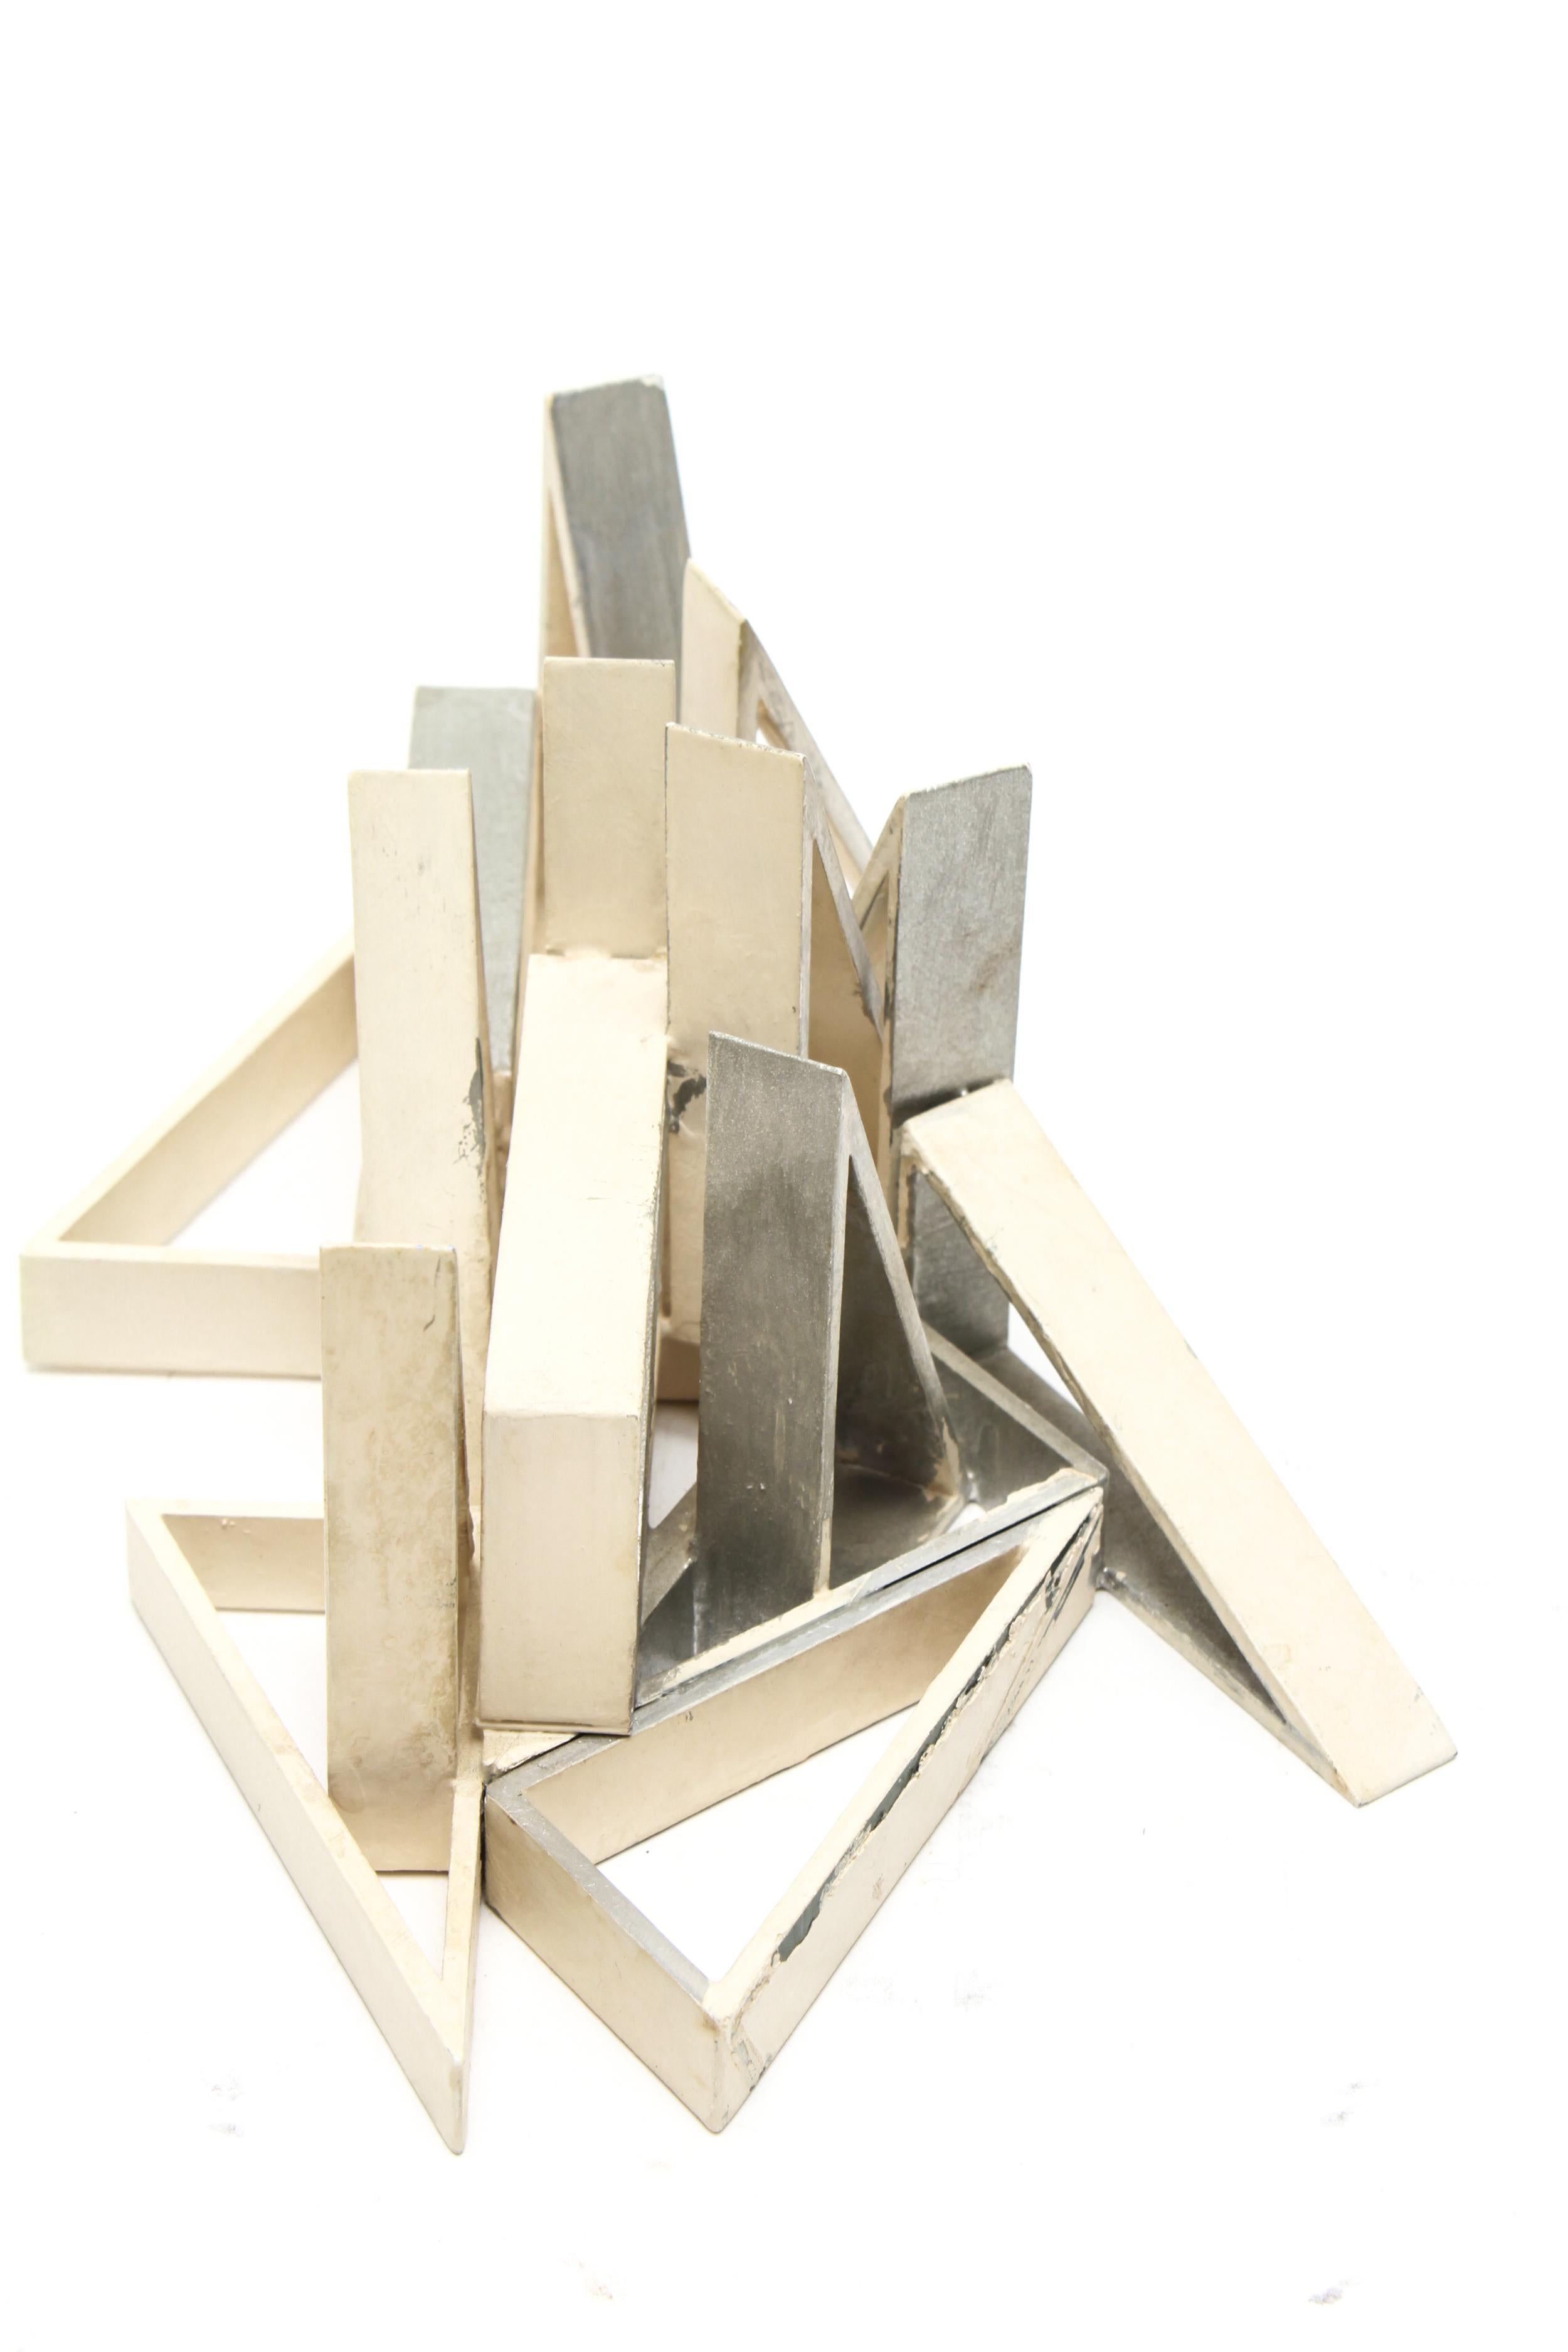 Modern geometric triangles tabletop sculpture in cast aluminum. It was likely made during the mid-to late 20th century. The piece is in great vintage condition with age -appropriate wear.